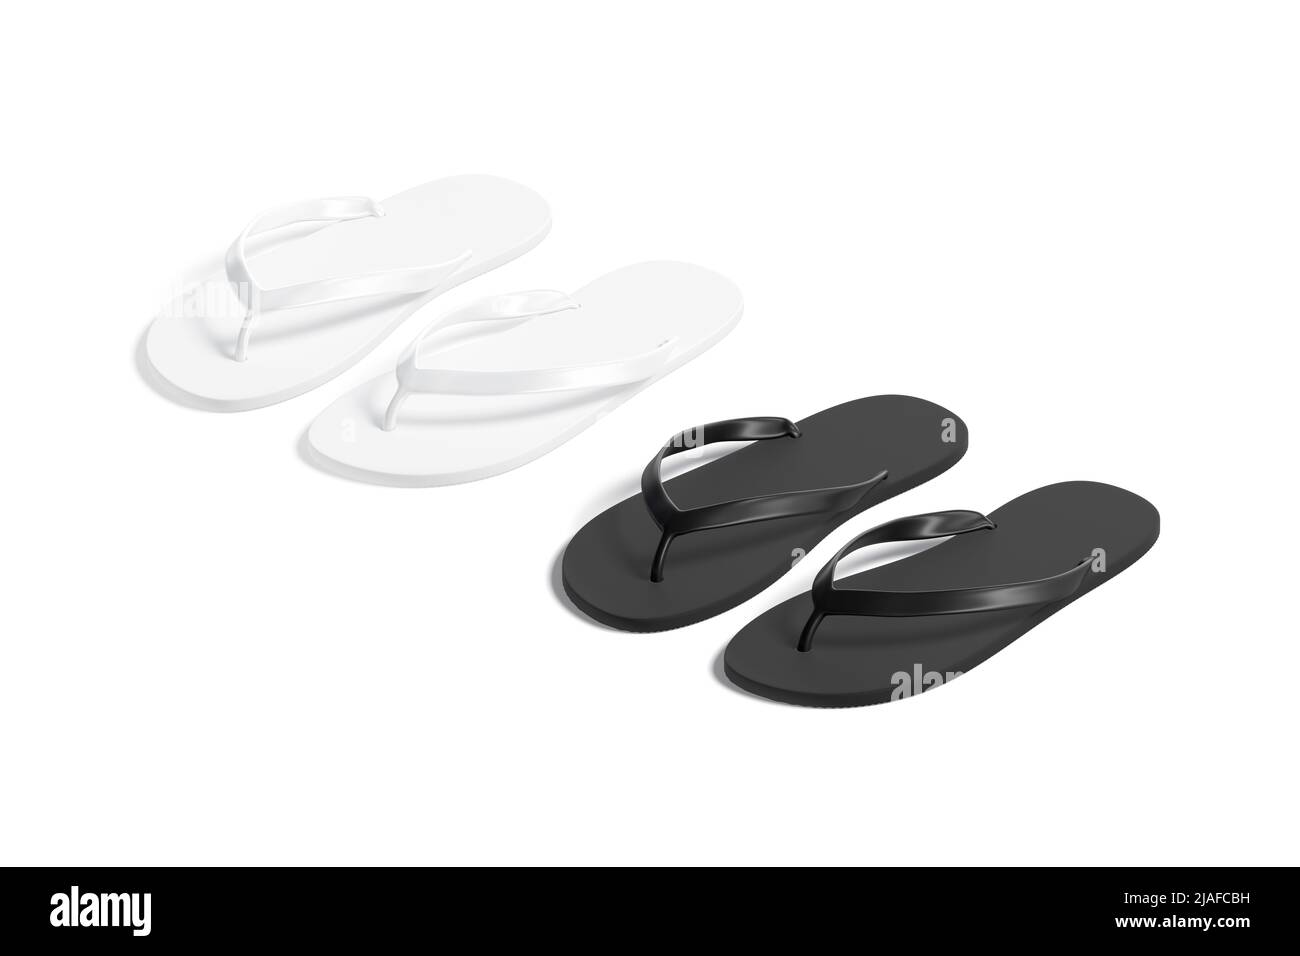 Blank black and white beach slippers mockup, side view Stock Photo